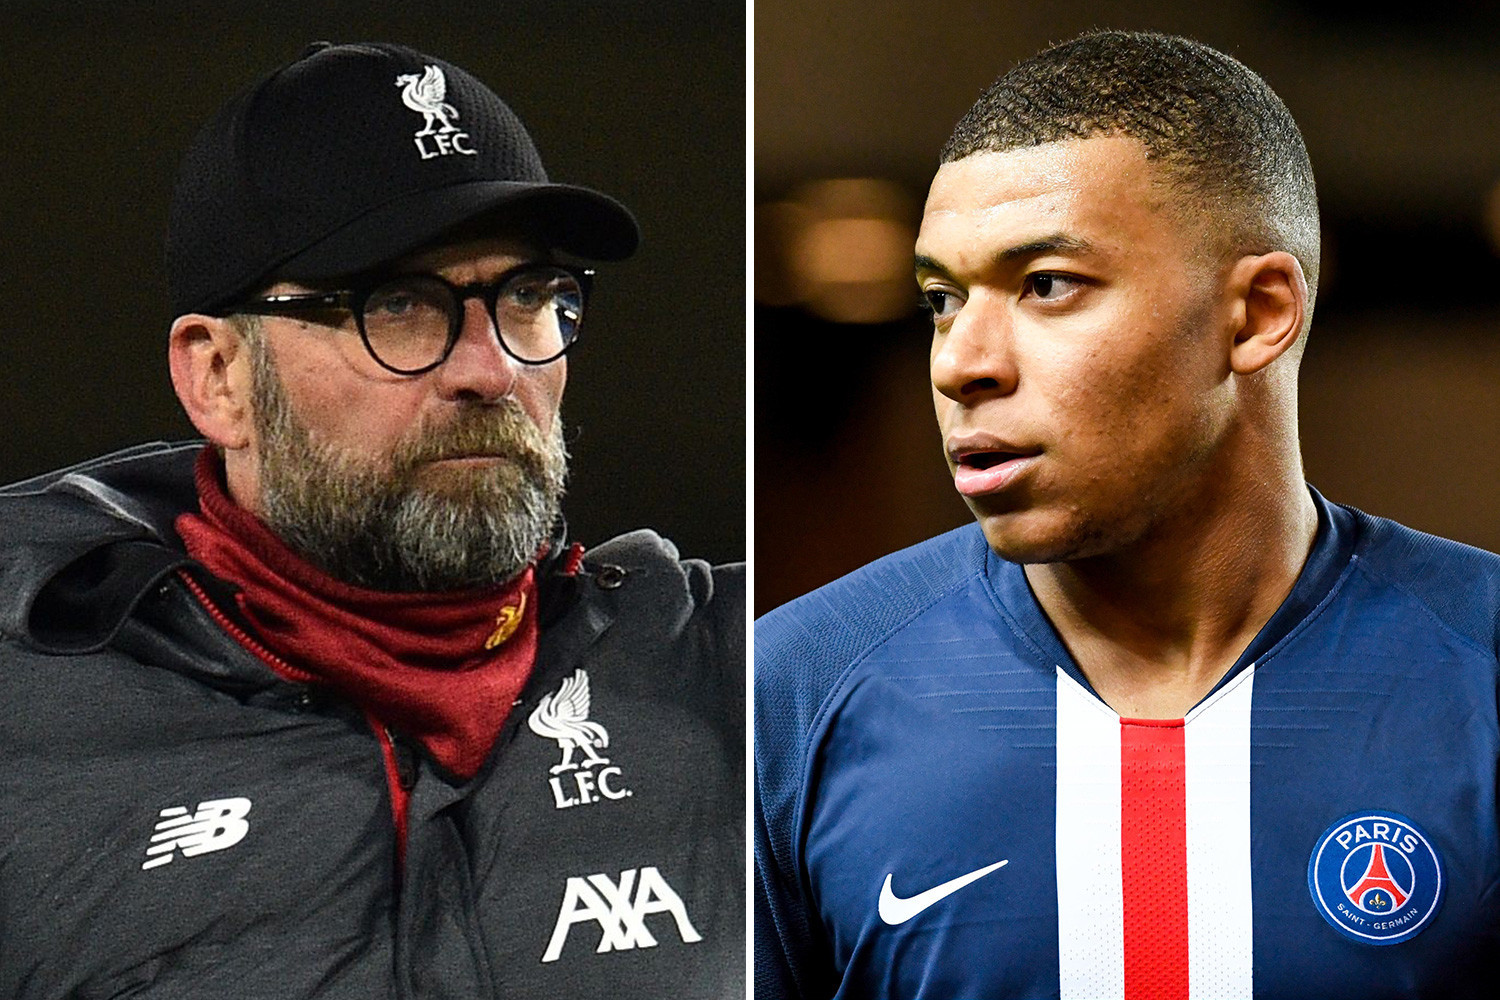 , Jurgen Klopp ‘calls Mbappe’s dad to discuss transfer for PSG star’ and beat Real Madrid to youngster’s signature